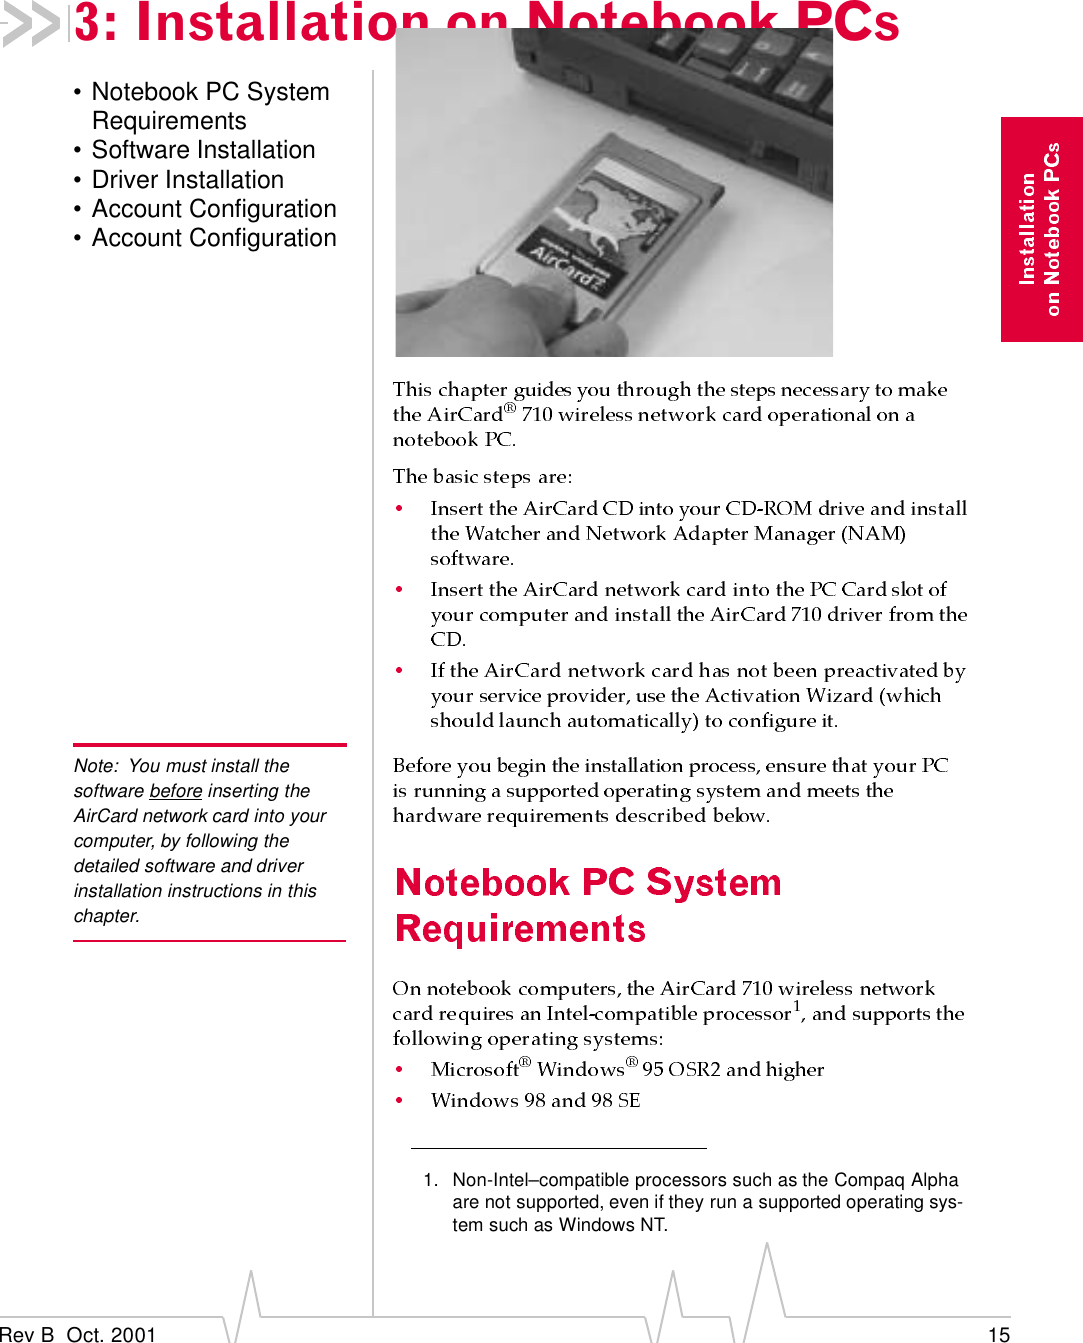 Rev B  Oct. 2001 153: Installation on Notebook PCs• Notebook PC System Requirements• Software Installation• Driver Installation• Account Configuration• Account ConfigurationNote: You must install the software before inserting the AirCard network card into your computer, by following the detailed software and driver installation instructions in this chapter. 1. Non-Intel–compatible processors such as the Compaq Alpha are not supported, even if they run a supported operating sys-tem such as Windows NT.